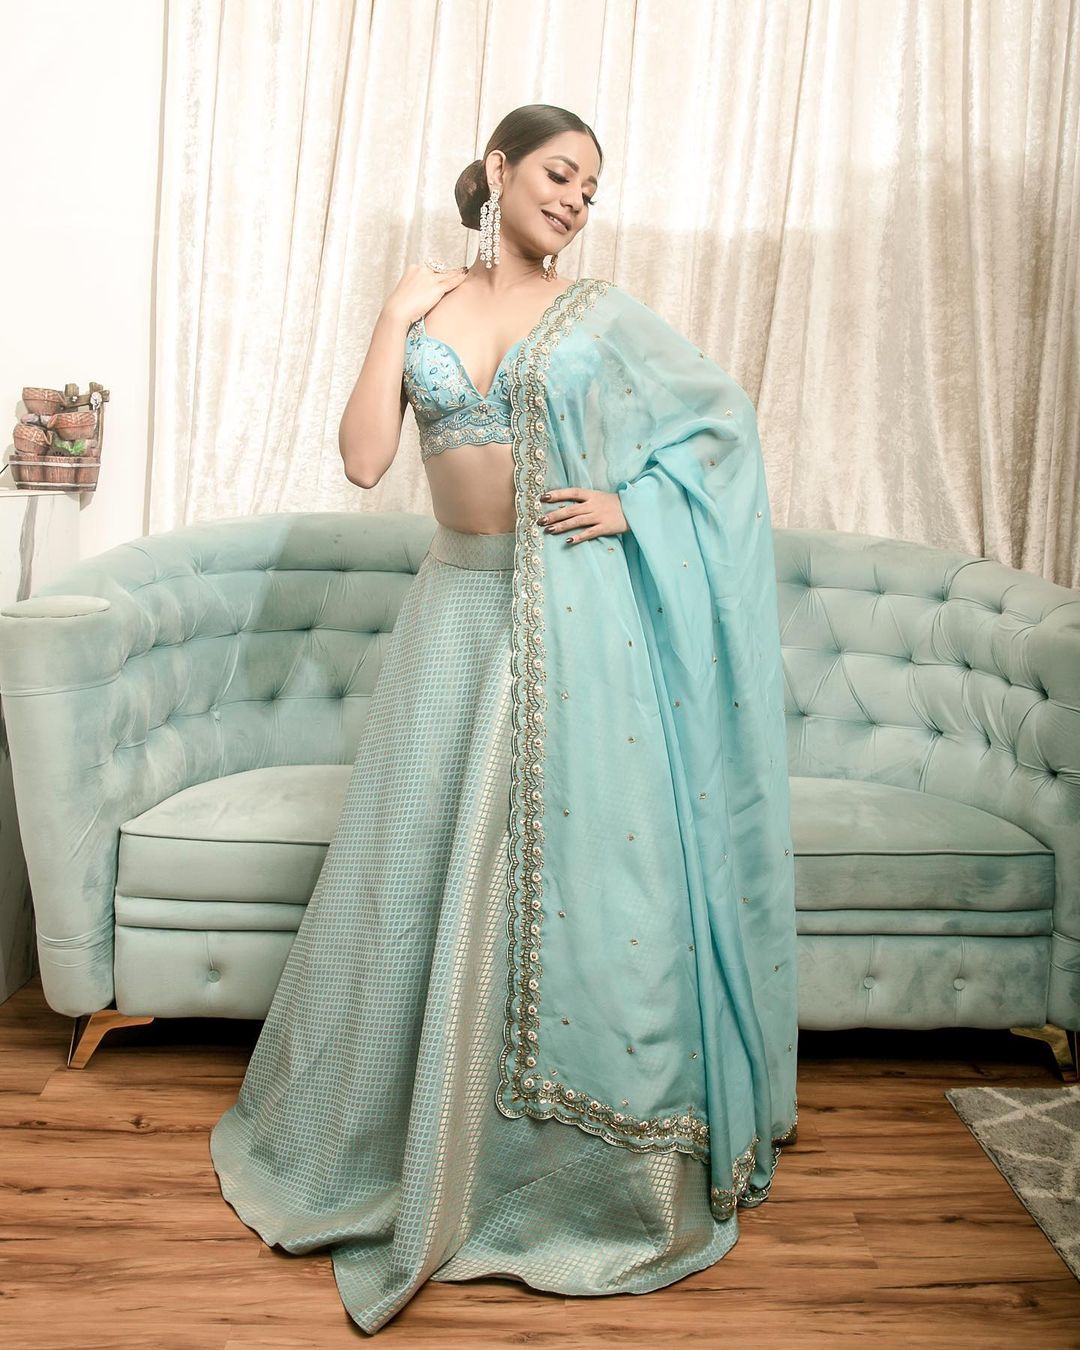 Aishwarya Dutta In Ice Blue Contemporary Lehenga Perfect Look For Bridesmaid Exclusive Outfits & Looks